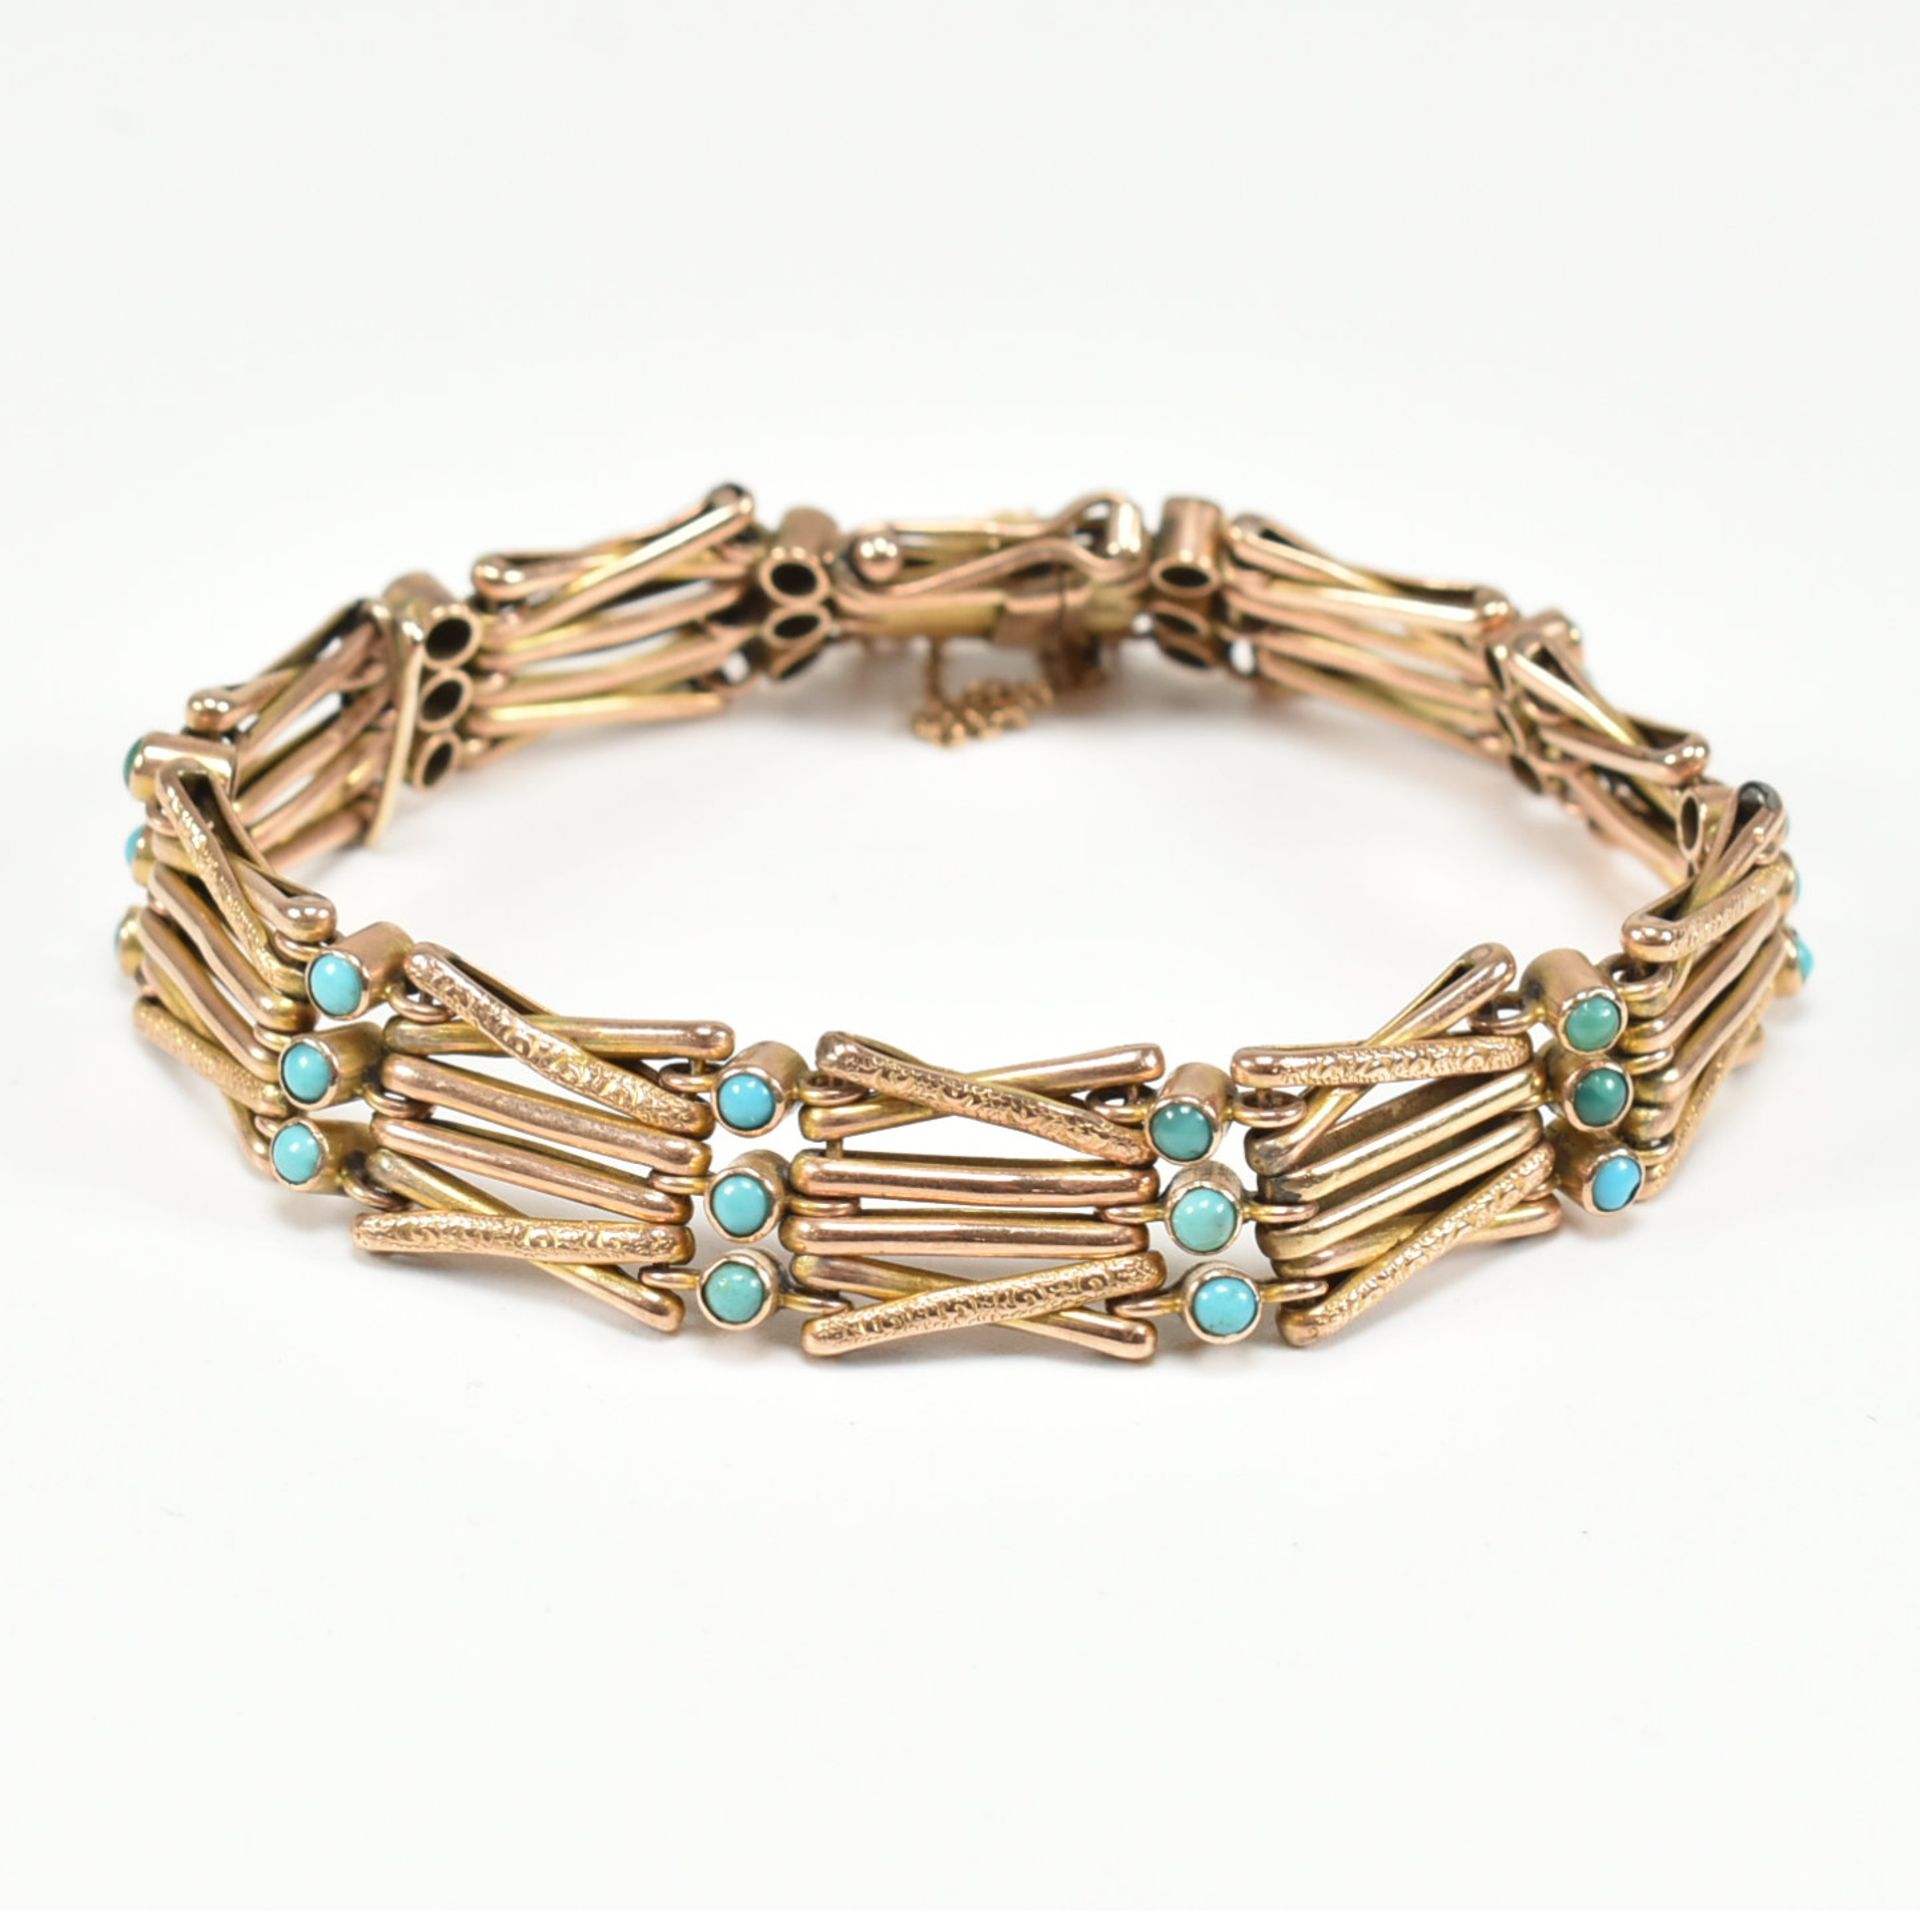 ANTIQUE 9CT GOLD & TURQUOISE BRACELET CHAIN - Image 2 of 5